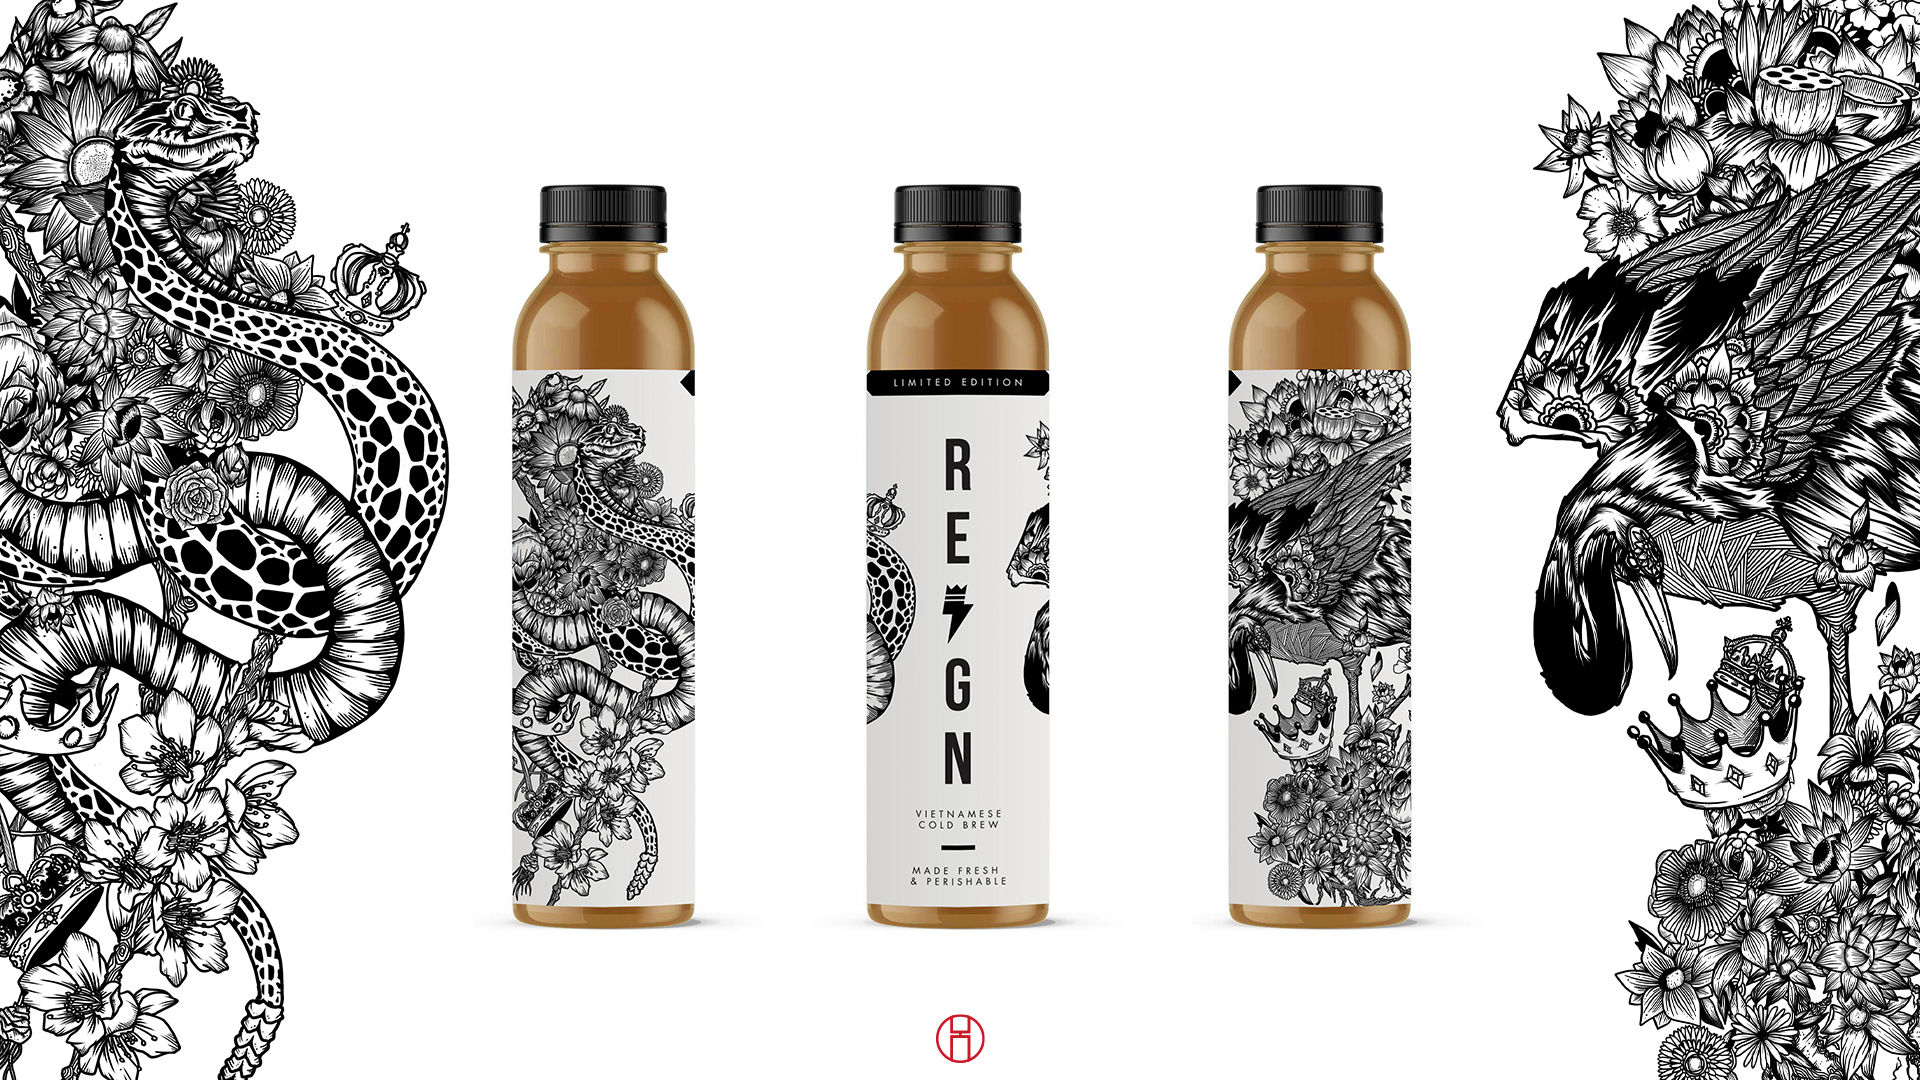 featured image:Reign Drink Lab: Cold Brew Label